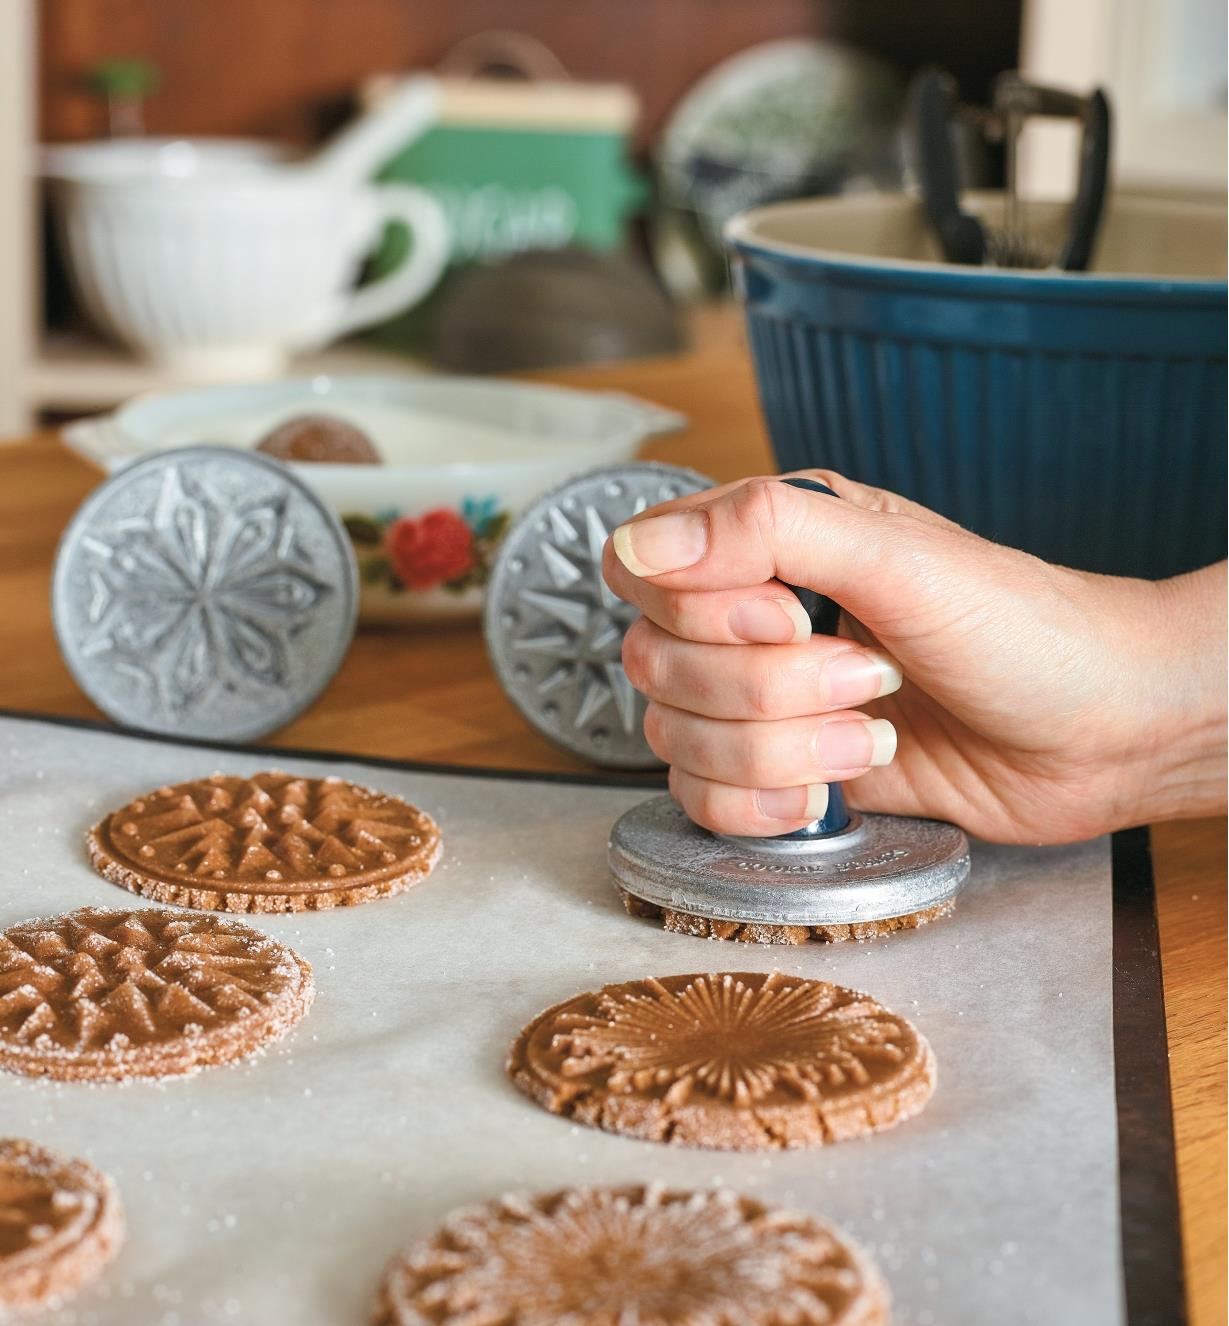 Stamping a design into a cookie